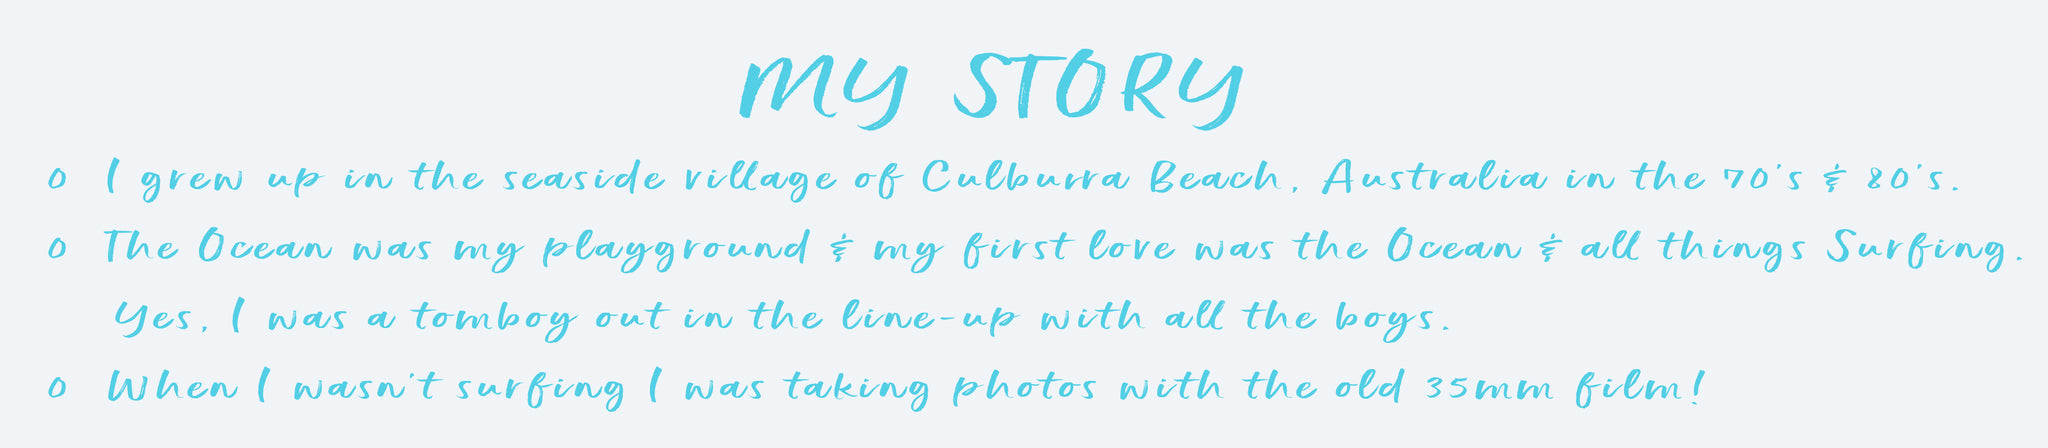 My Story for About Us Page SeaHouse Imagery